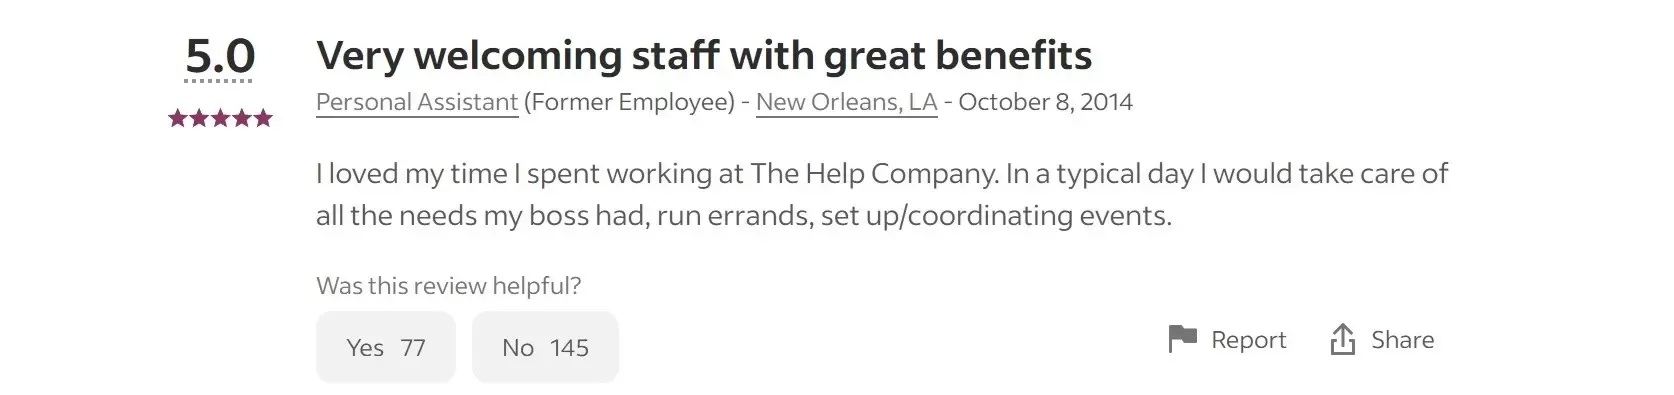 positive employee review of The Help Company